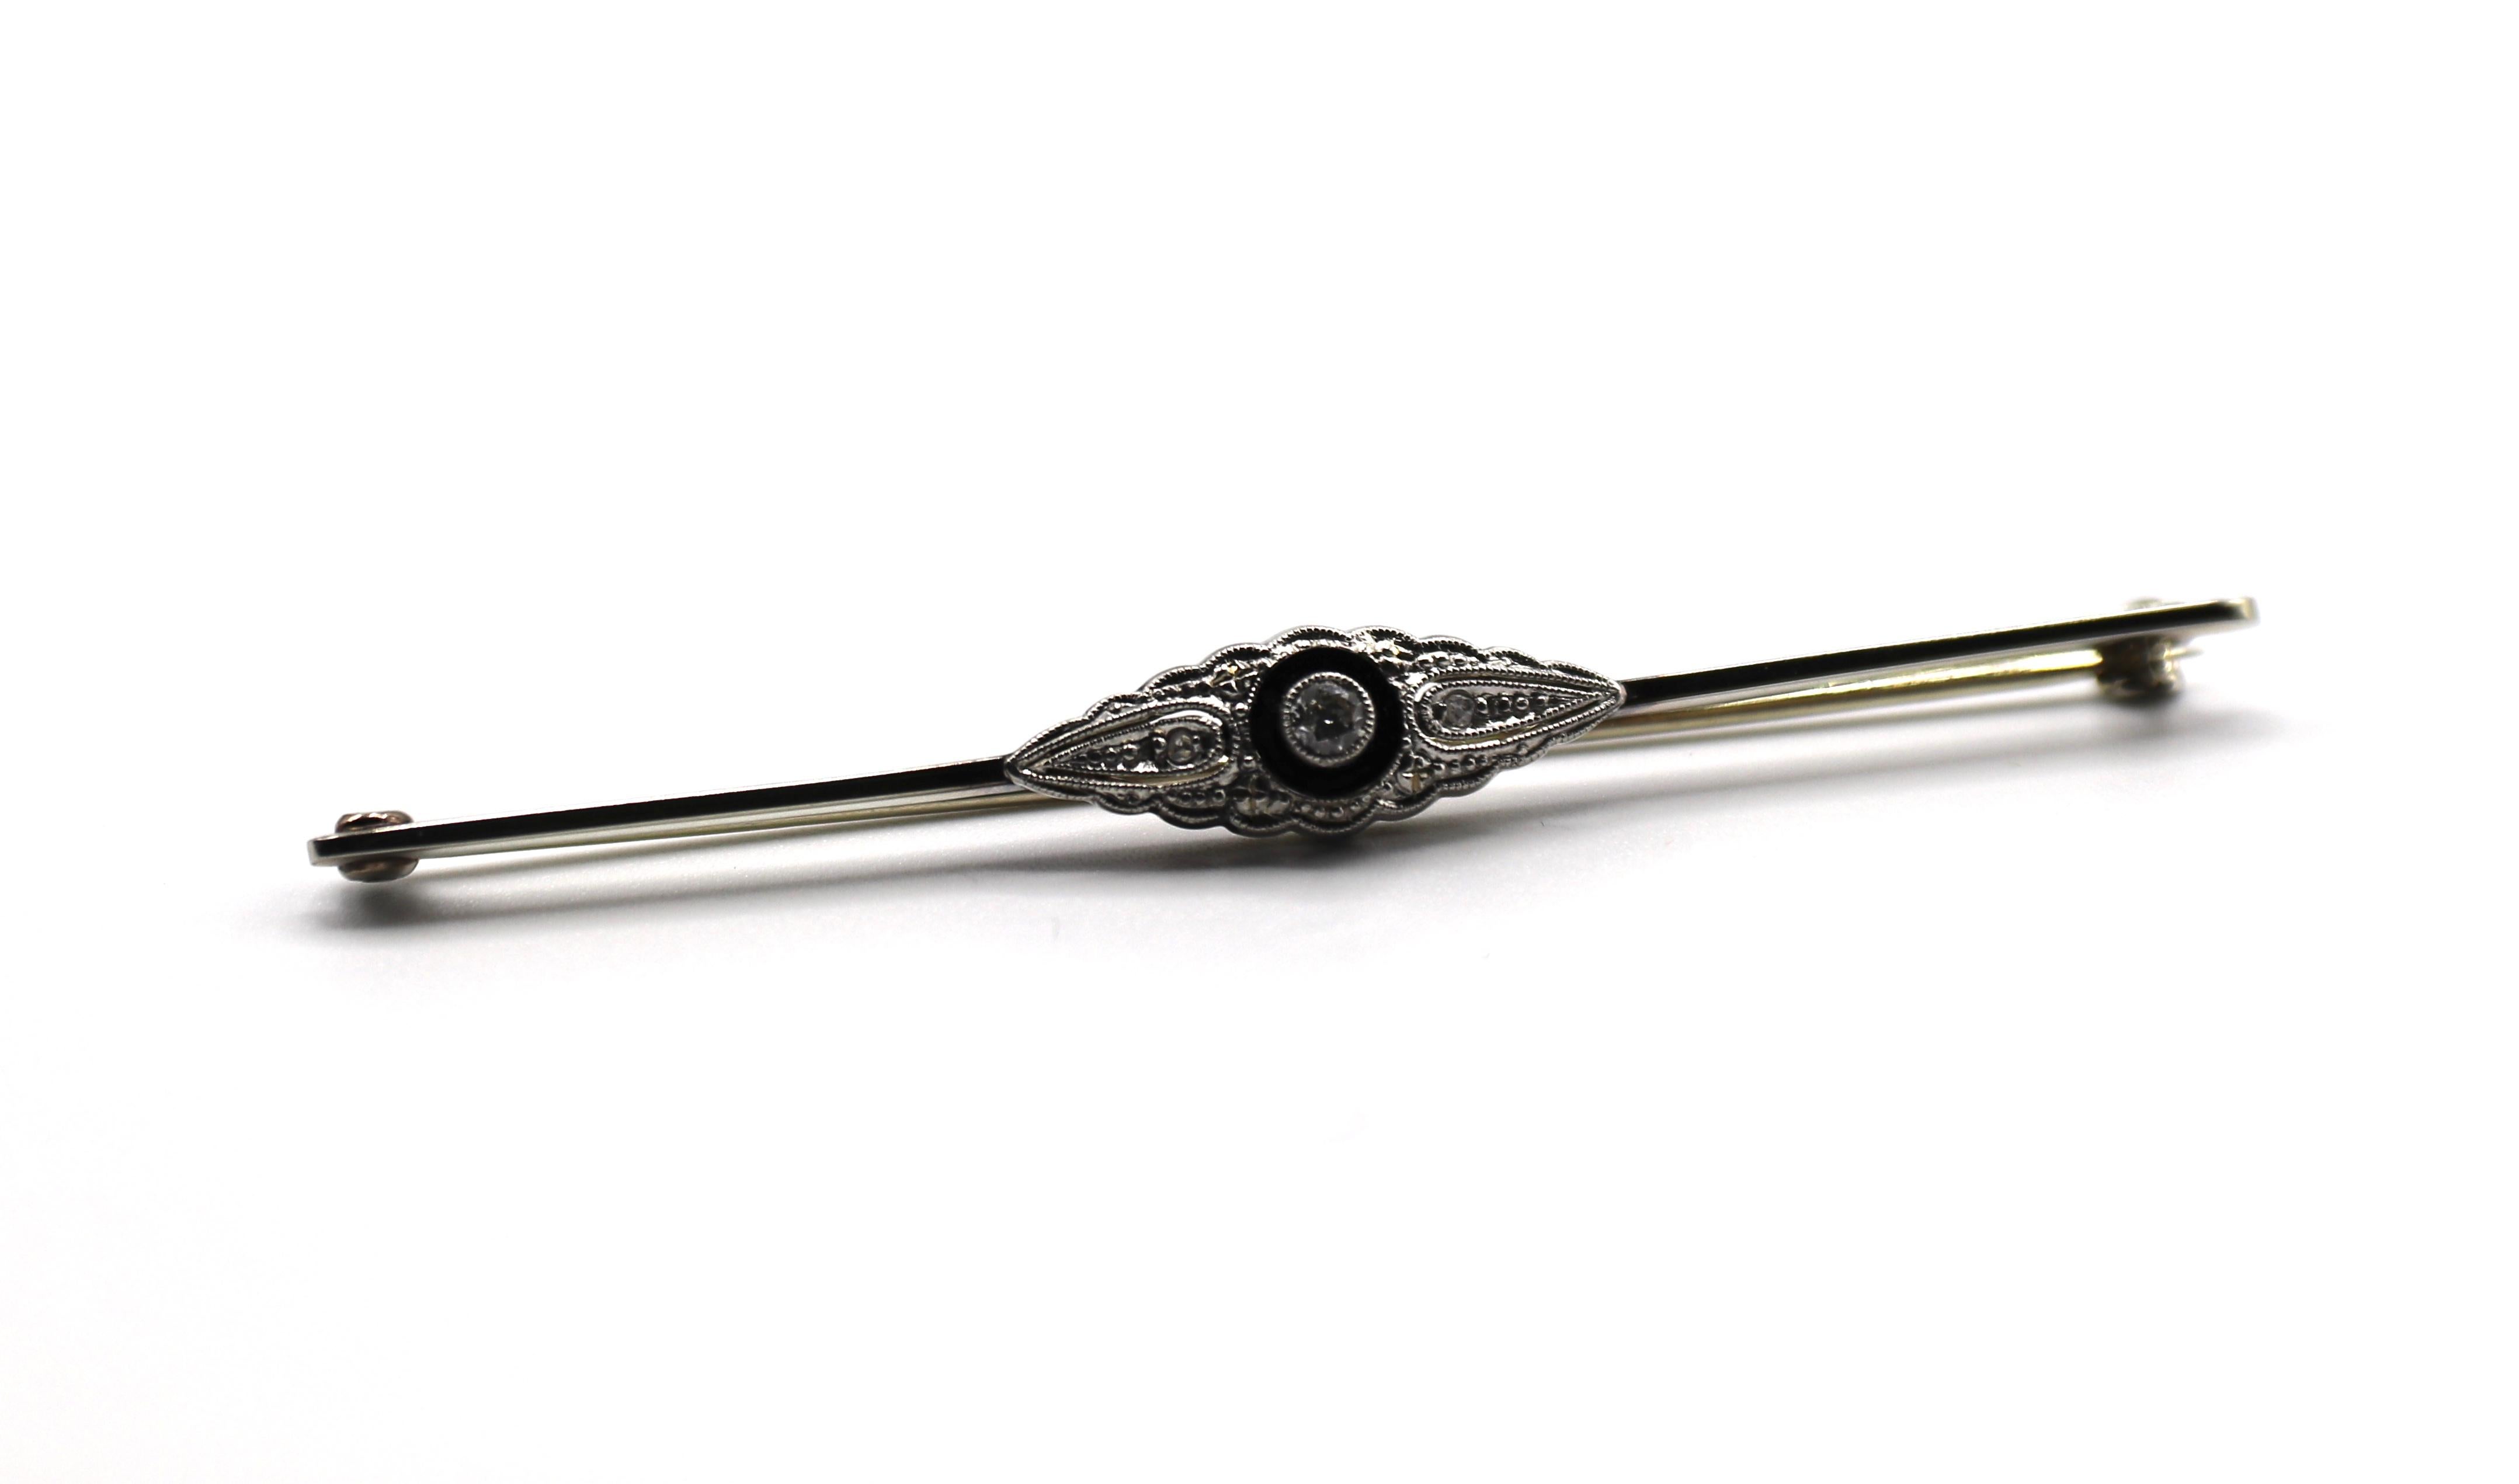 Antique 14K White Gold Mine Cut and Round Diamond Black Onyx Bar Pin Brooch

Metal: 14k white gold
Weight: 2.55 grams 
Diamonds: 3 mine cut round diamonds, approx. .08 CTW H VS-SI
Length: 2.5 inches
Onyx disc in the center